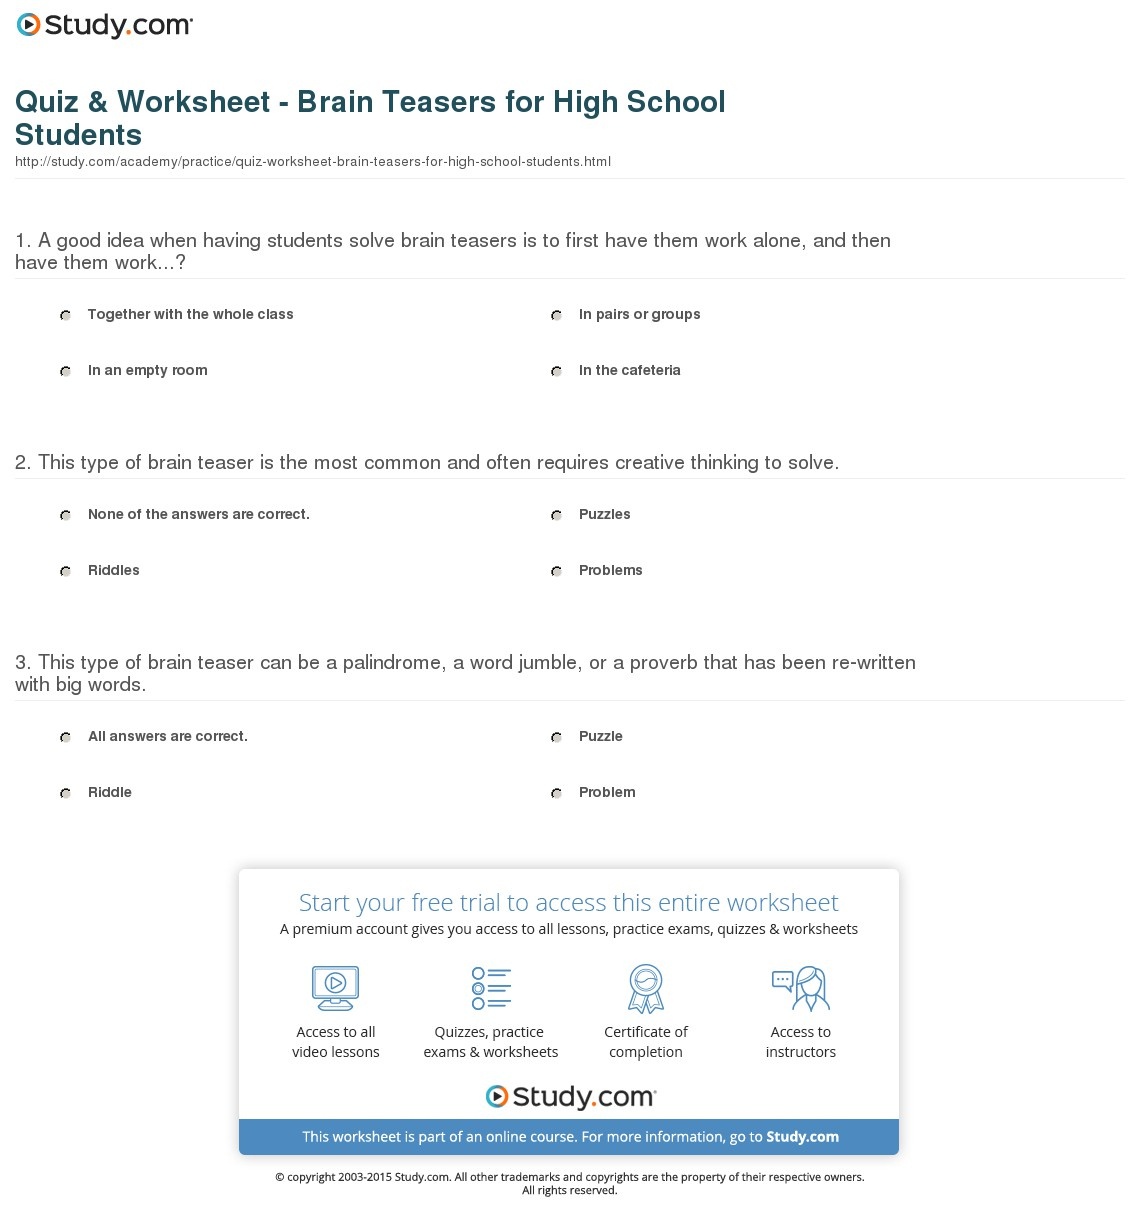 quiz-worksheet-brain-teasers-for-high-school-students-study